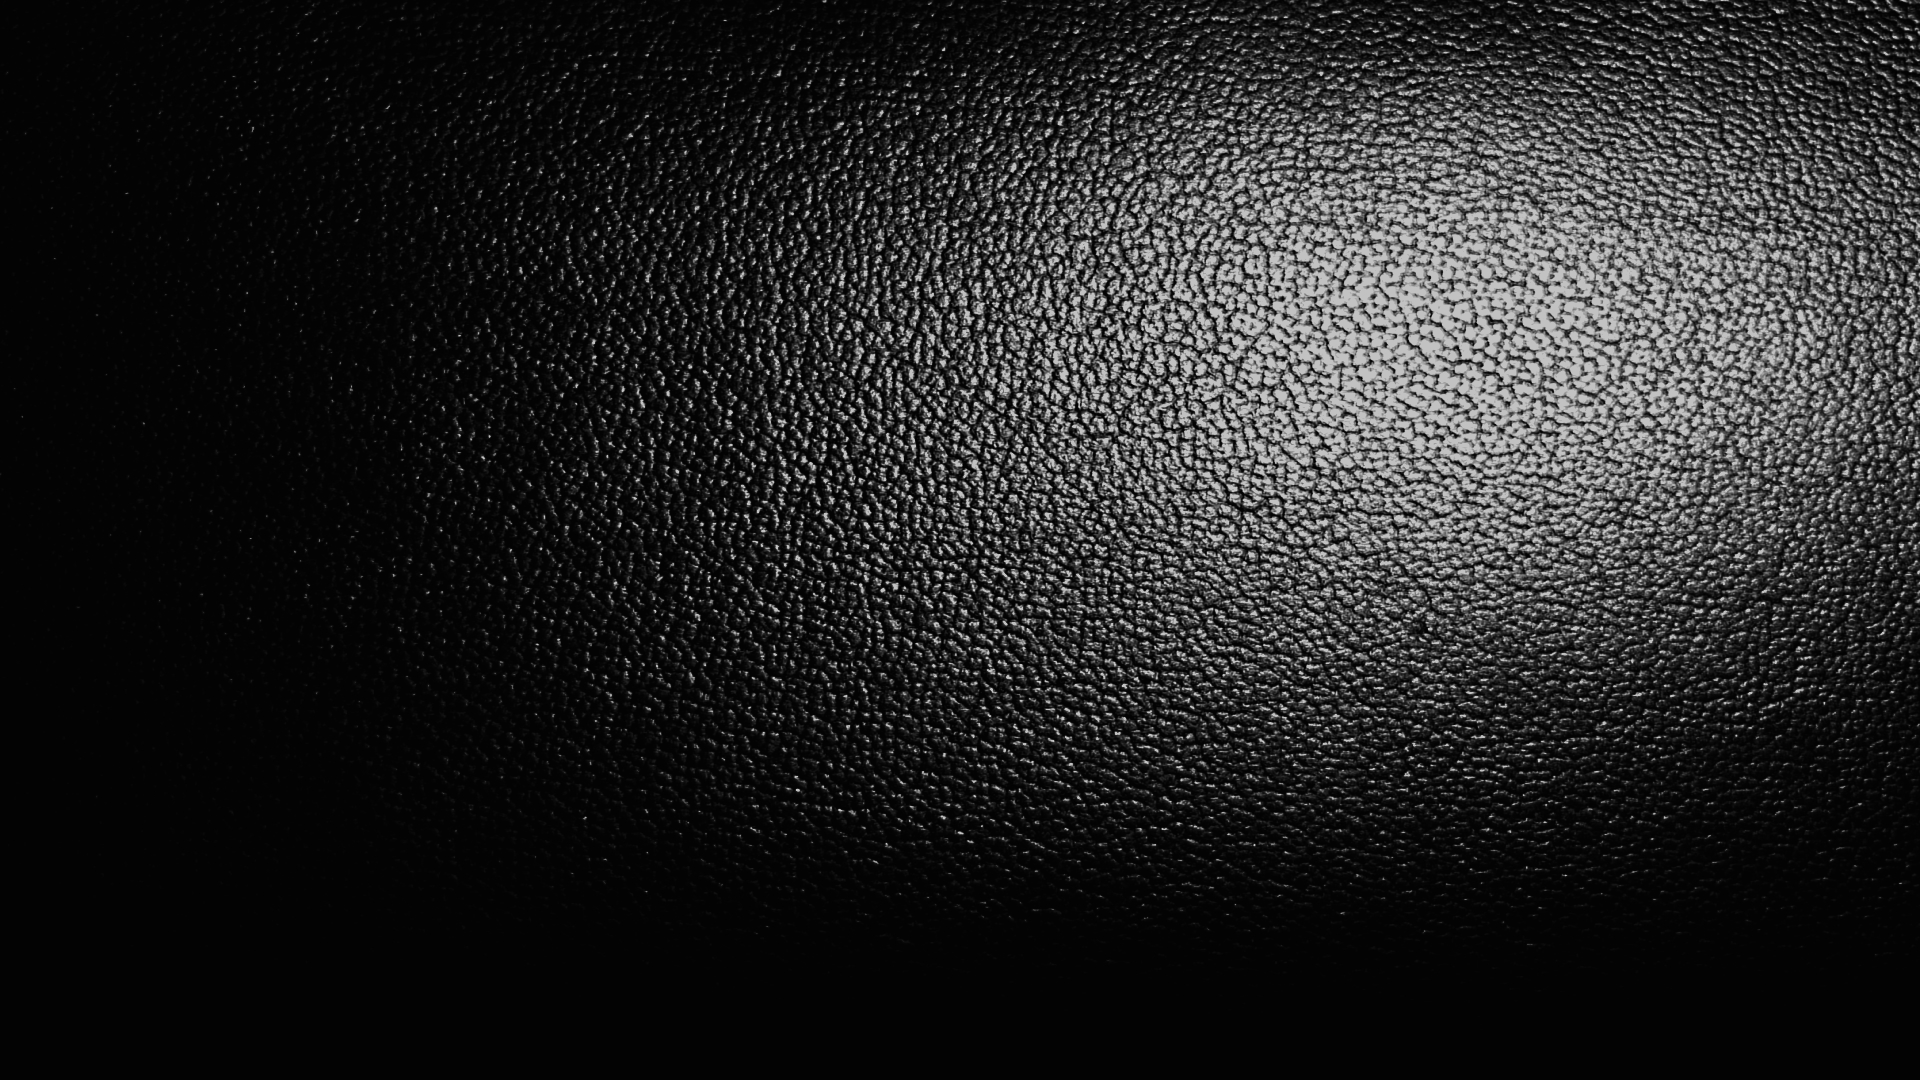 Download Leather Textures Wallpaper 1920x1080 Full HD Wallpapers